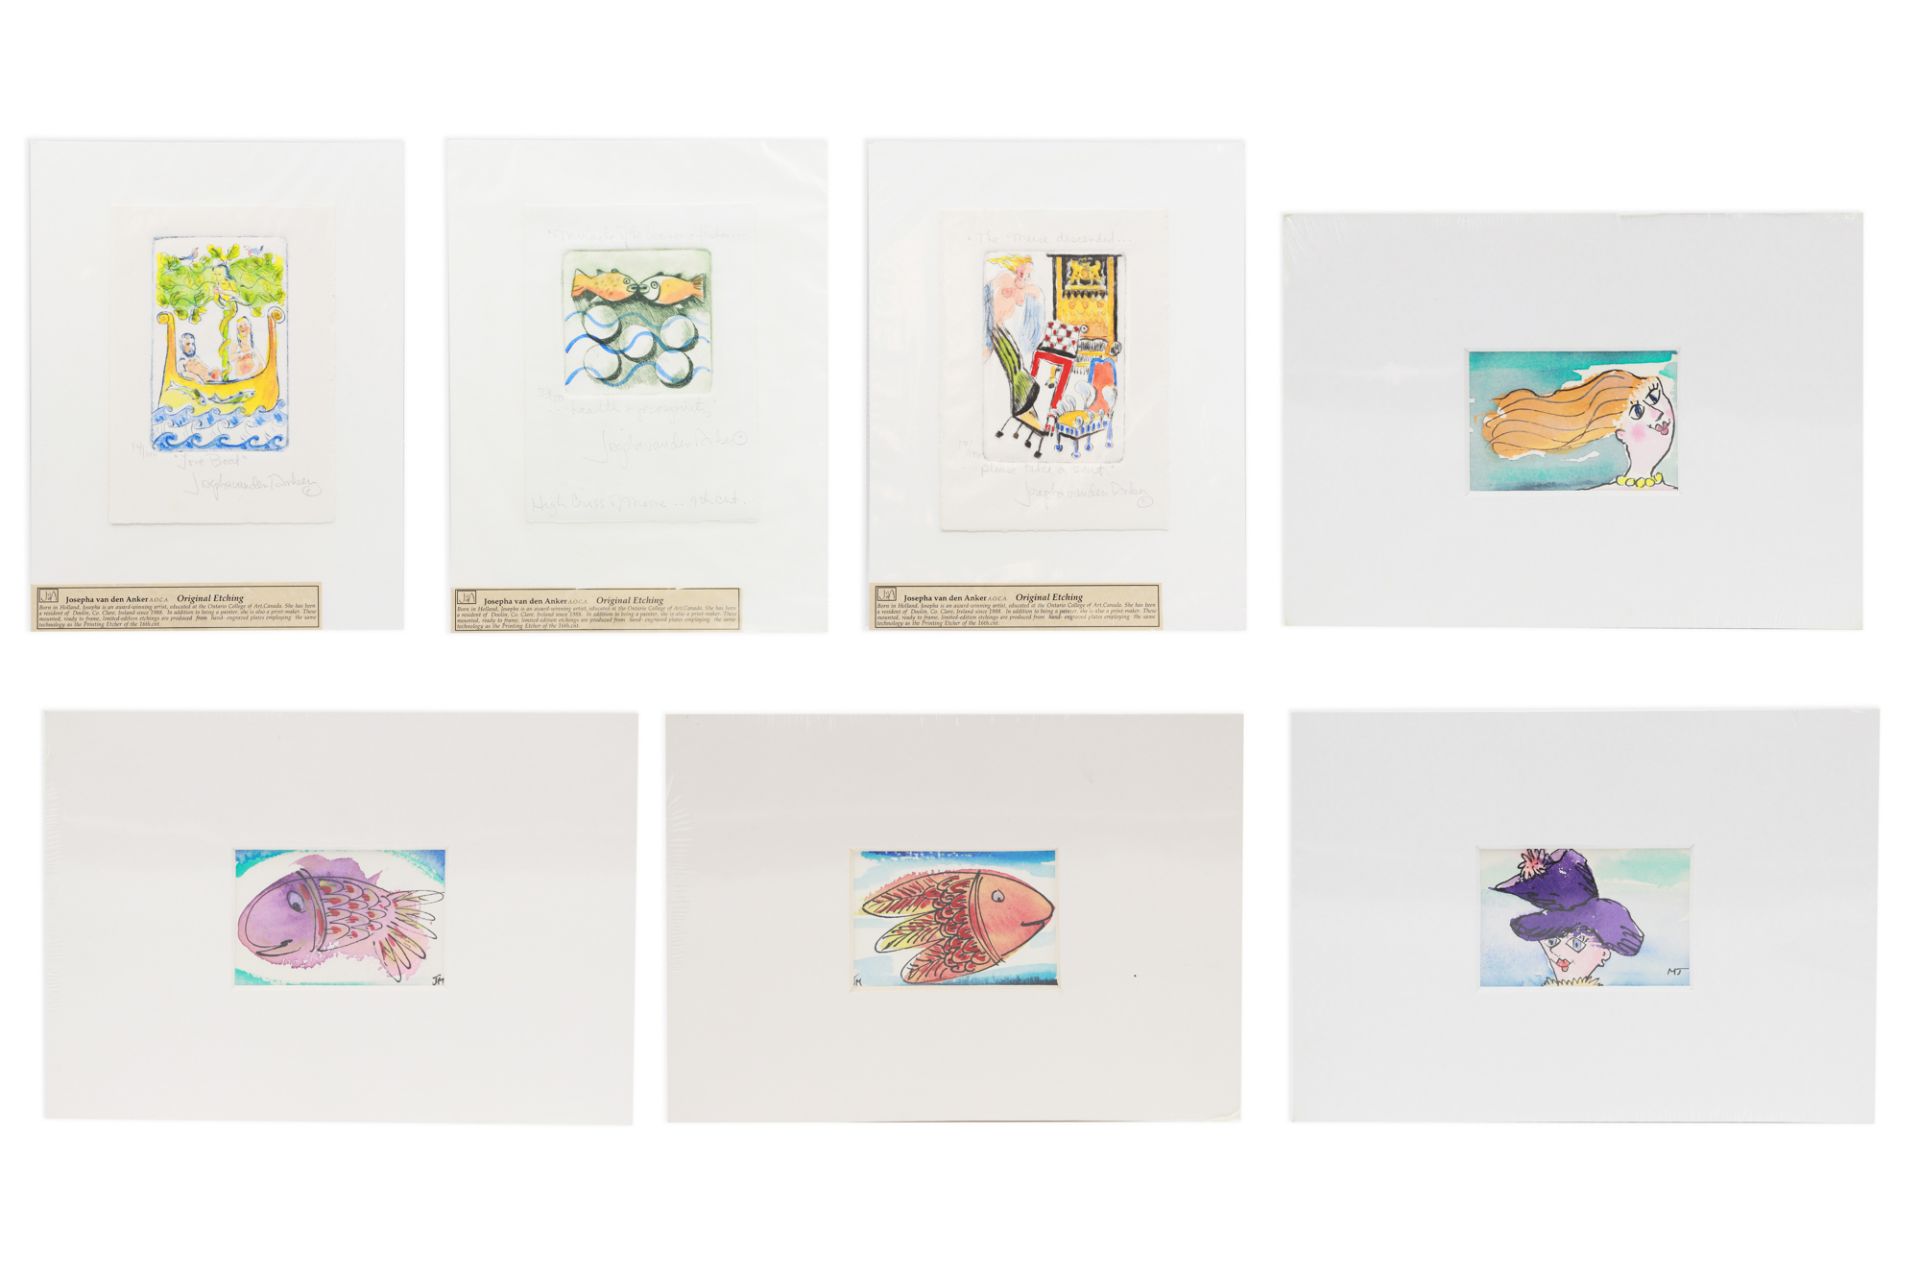 A MISCELLANEOUS COLLECTION OF FOUR ORIGINAL HANDCRAFTED DRAWINGS, together with thee coloured